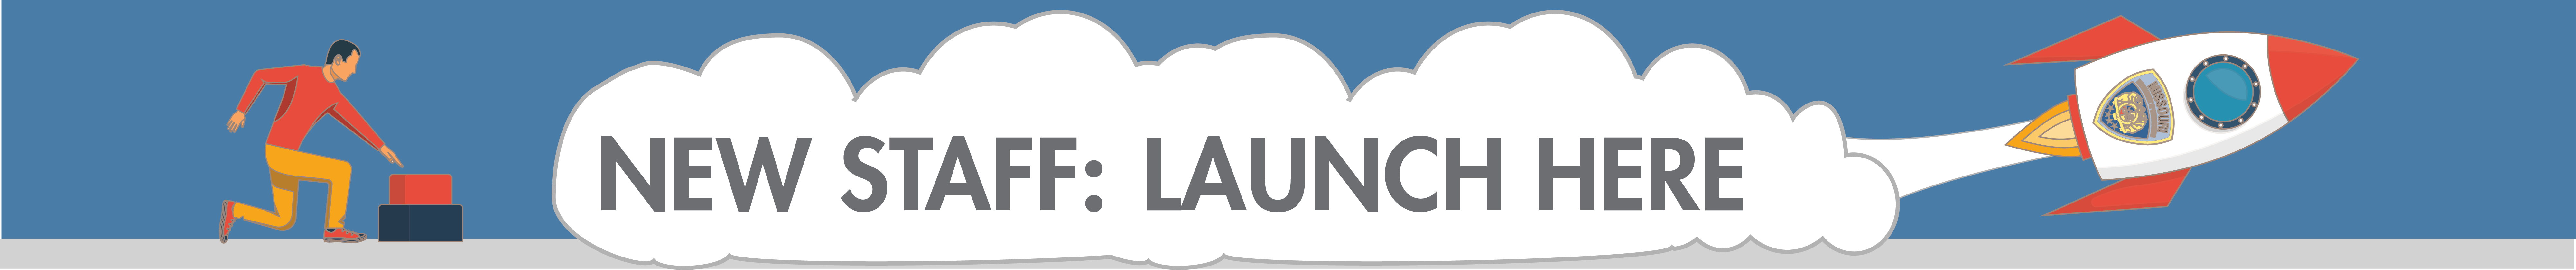 New Staff: Launch Here clickable banner